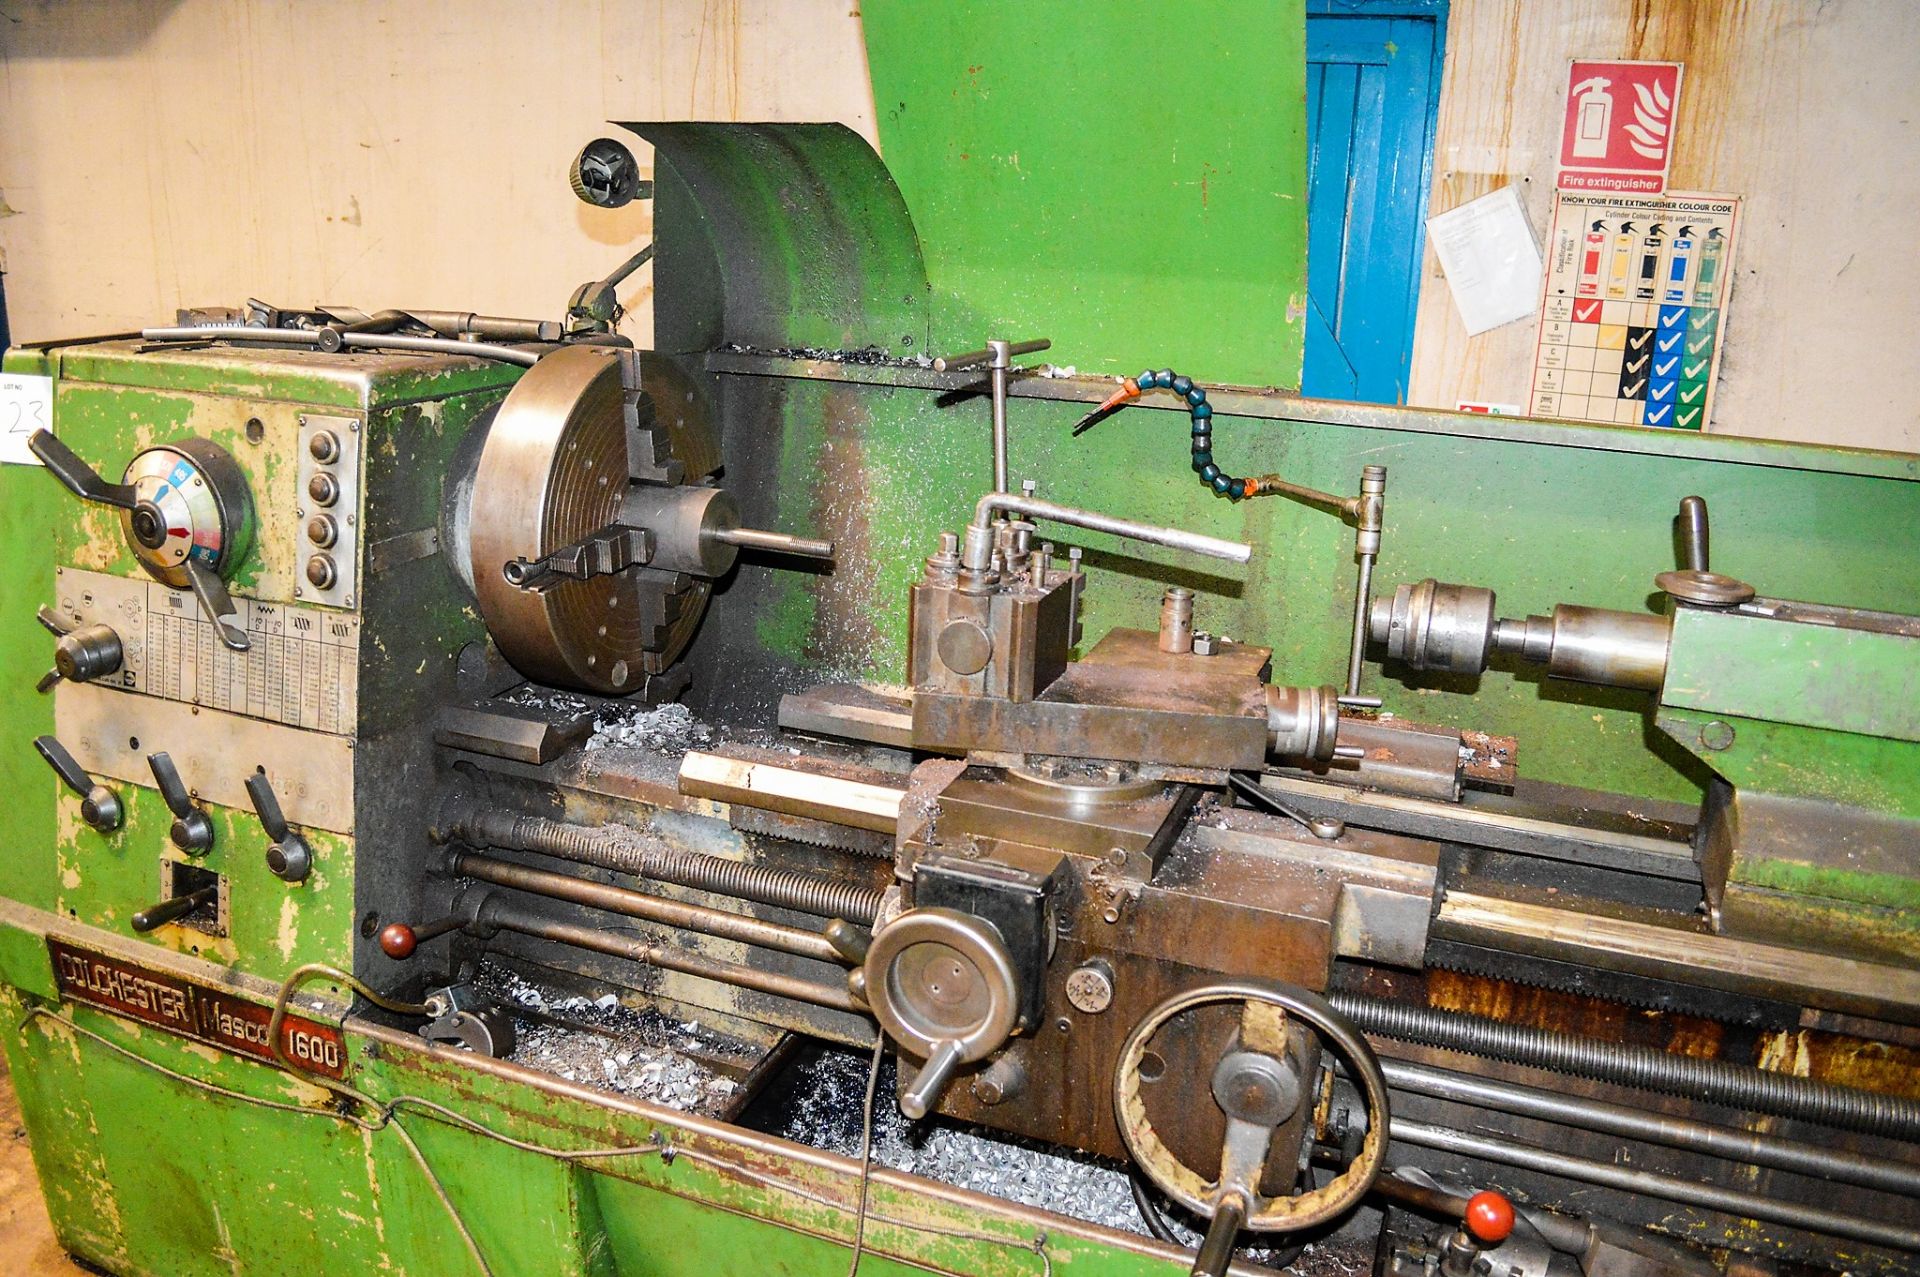 Colchester Mascot 1600 gap bed centre lathe S/N: 7/0001/05950 Swing in gap 11 inch by 42 inch - Image 2 of 2